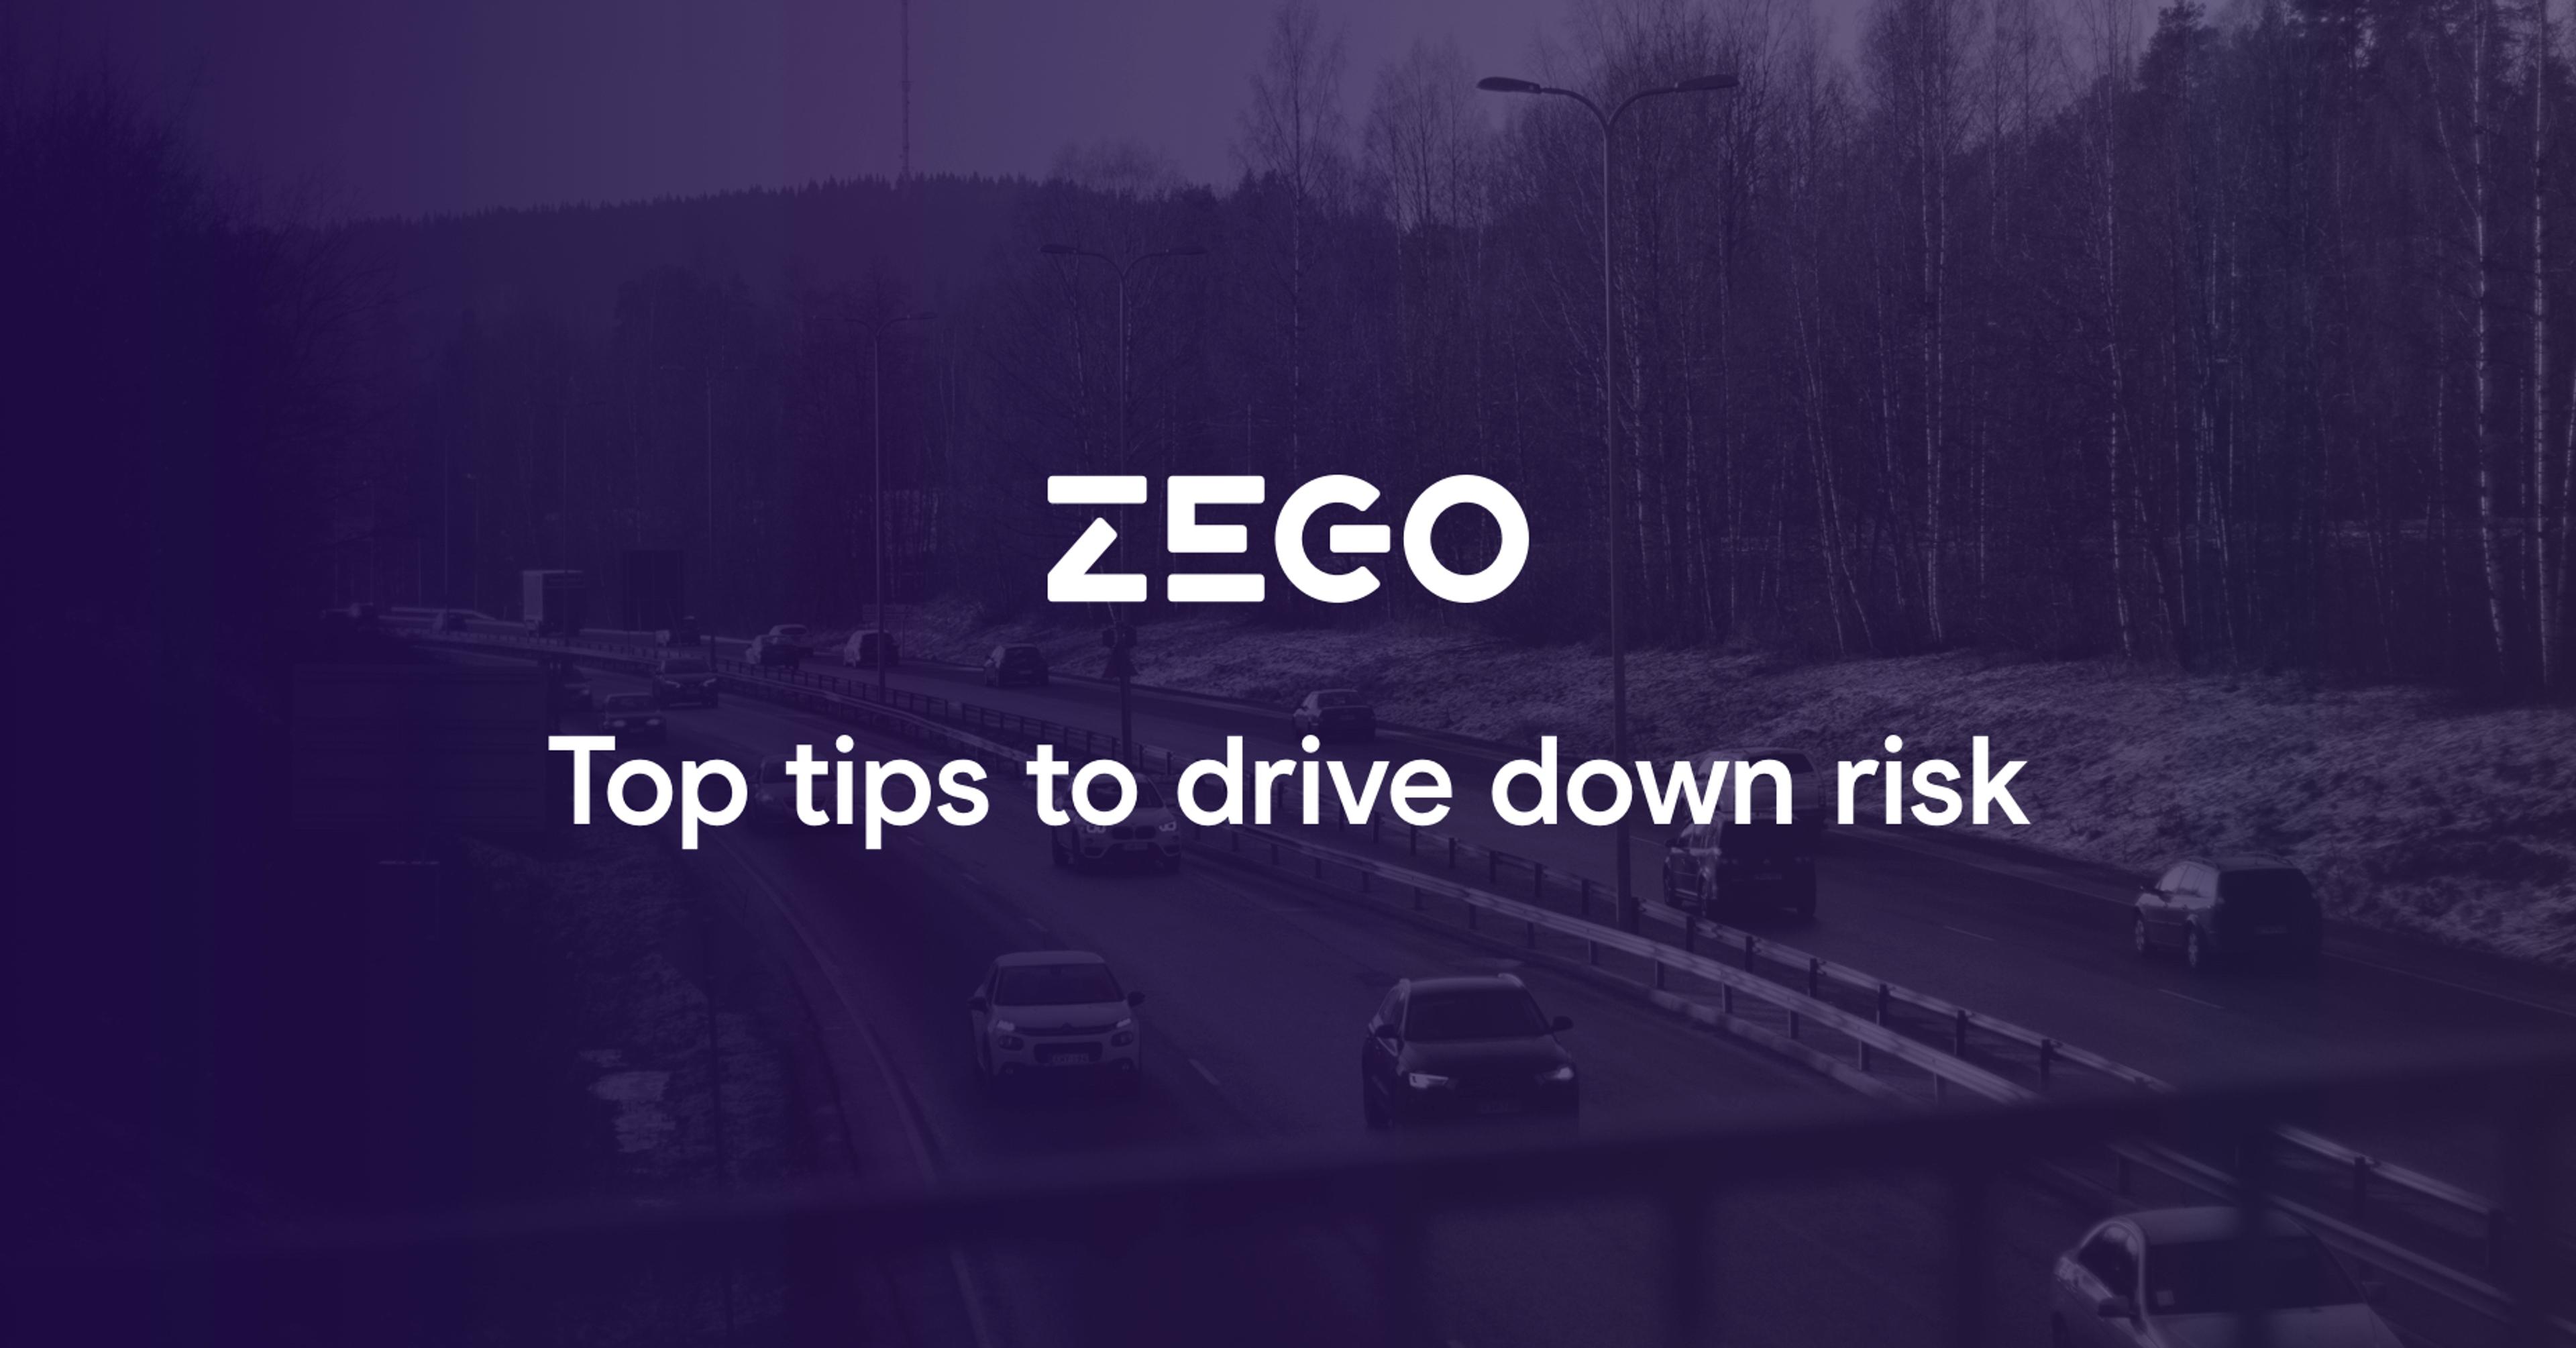 Top tips to drive down risk